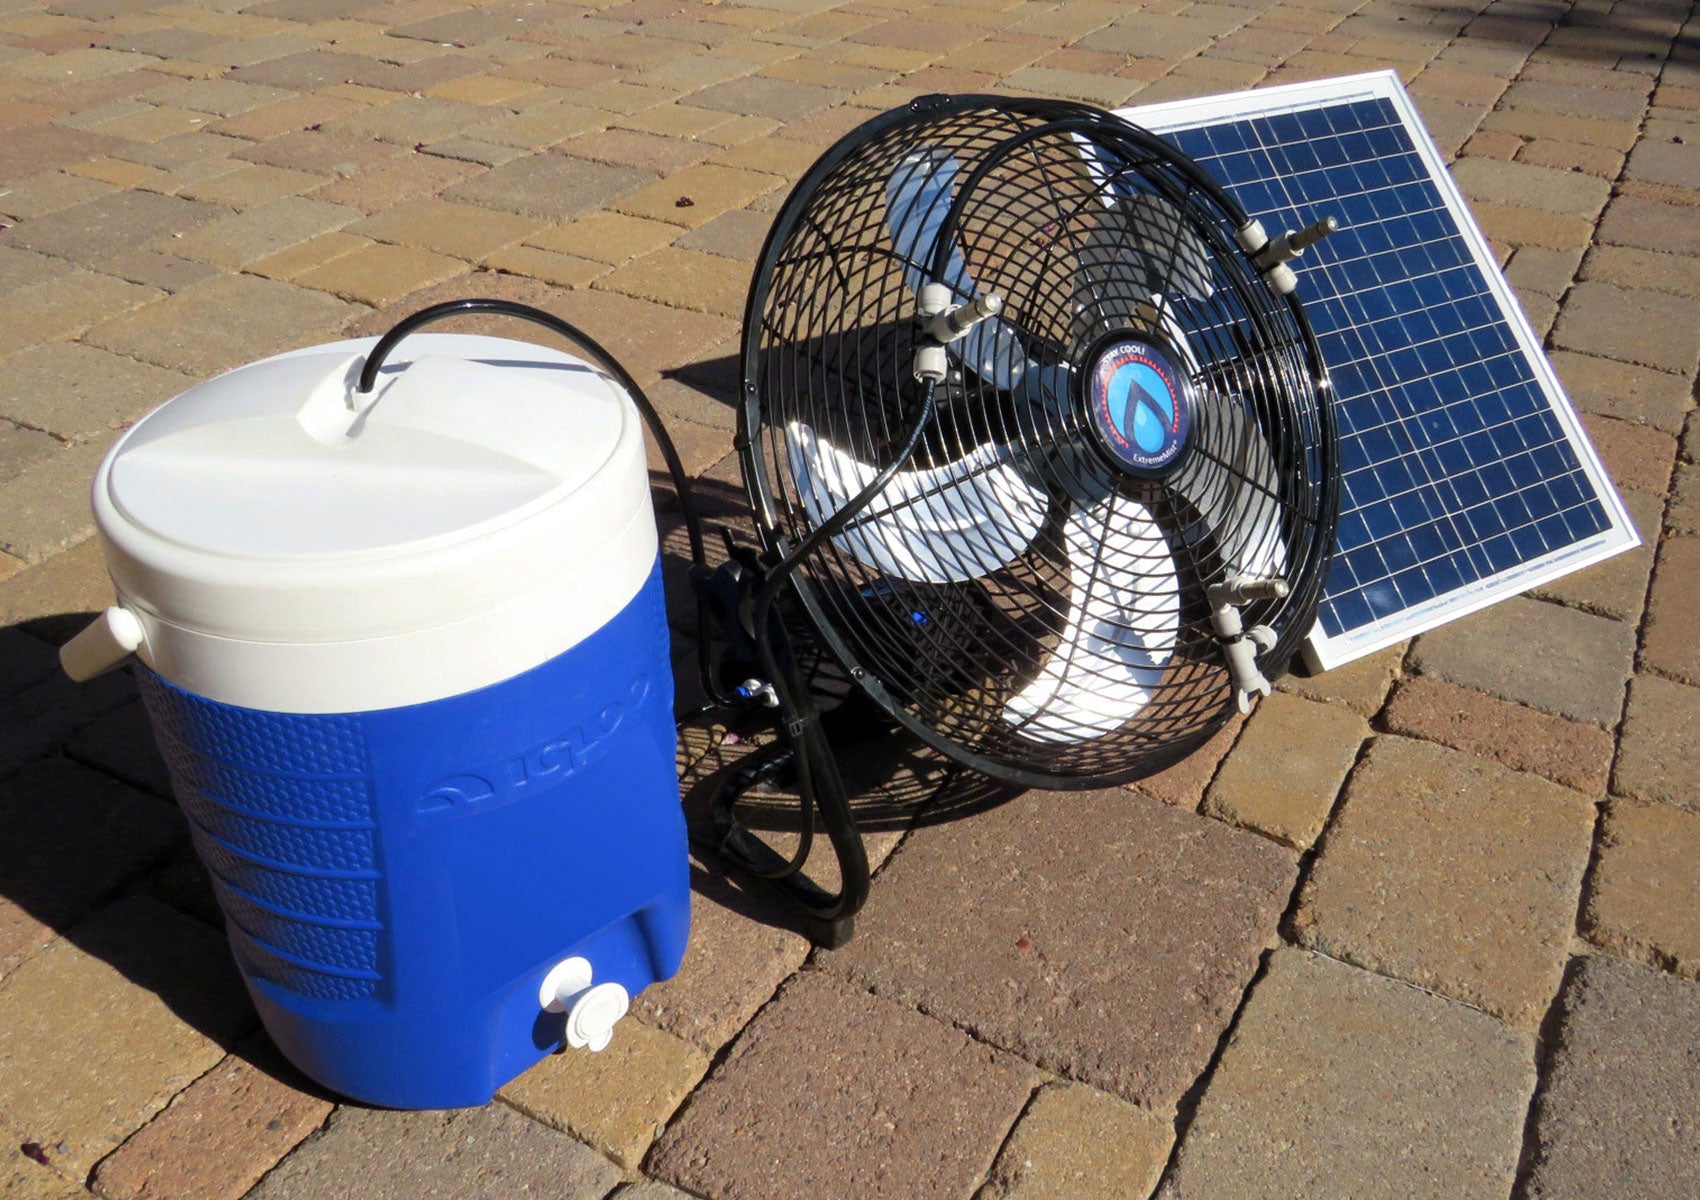 portable misting fan with solar panel and water cooler on pavers